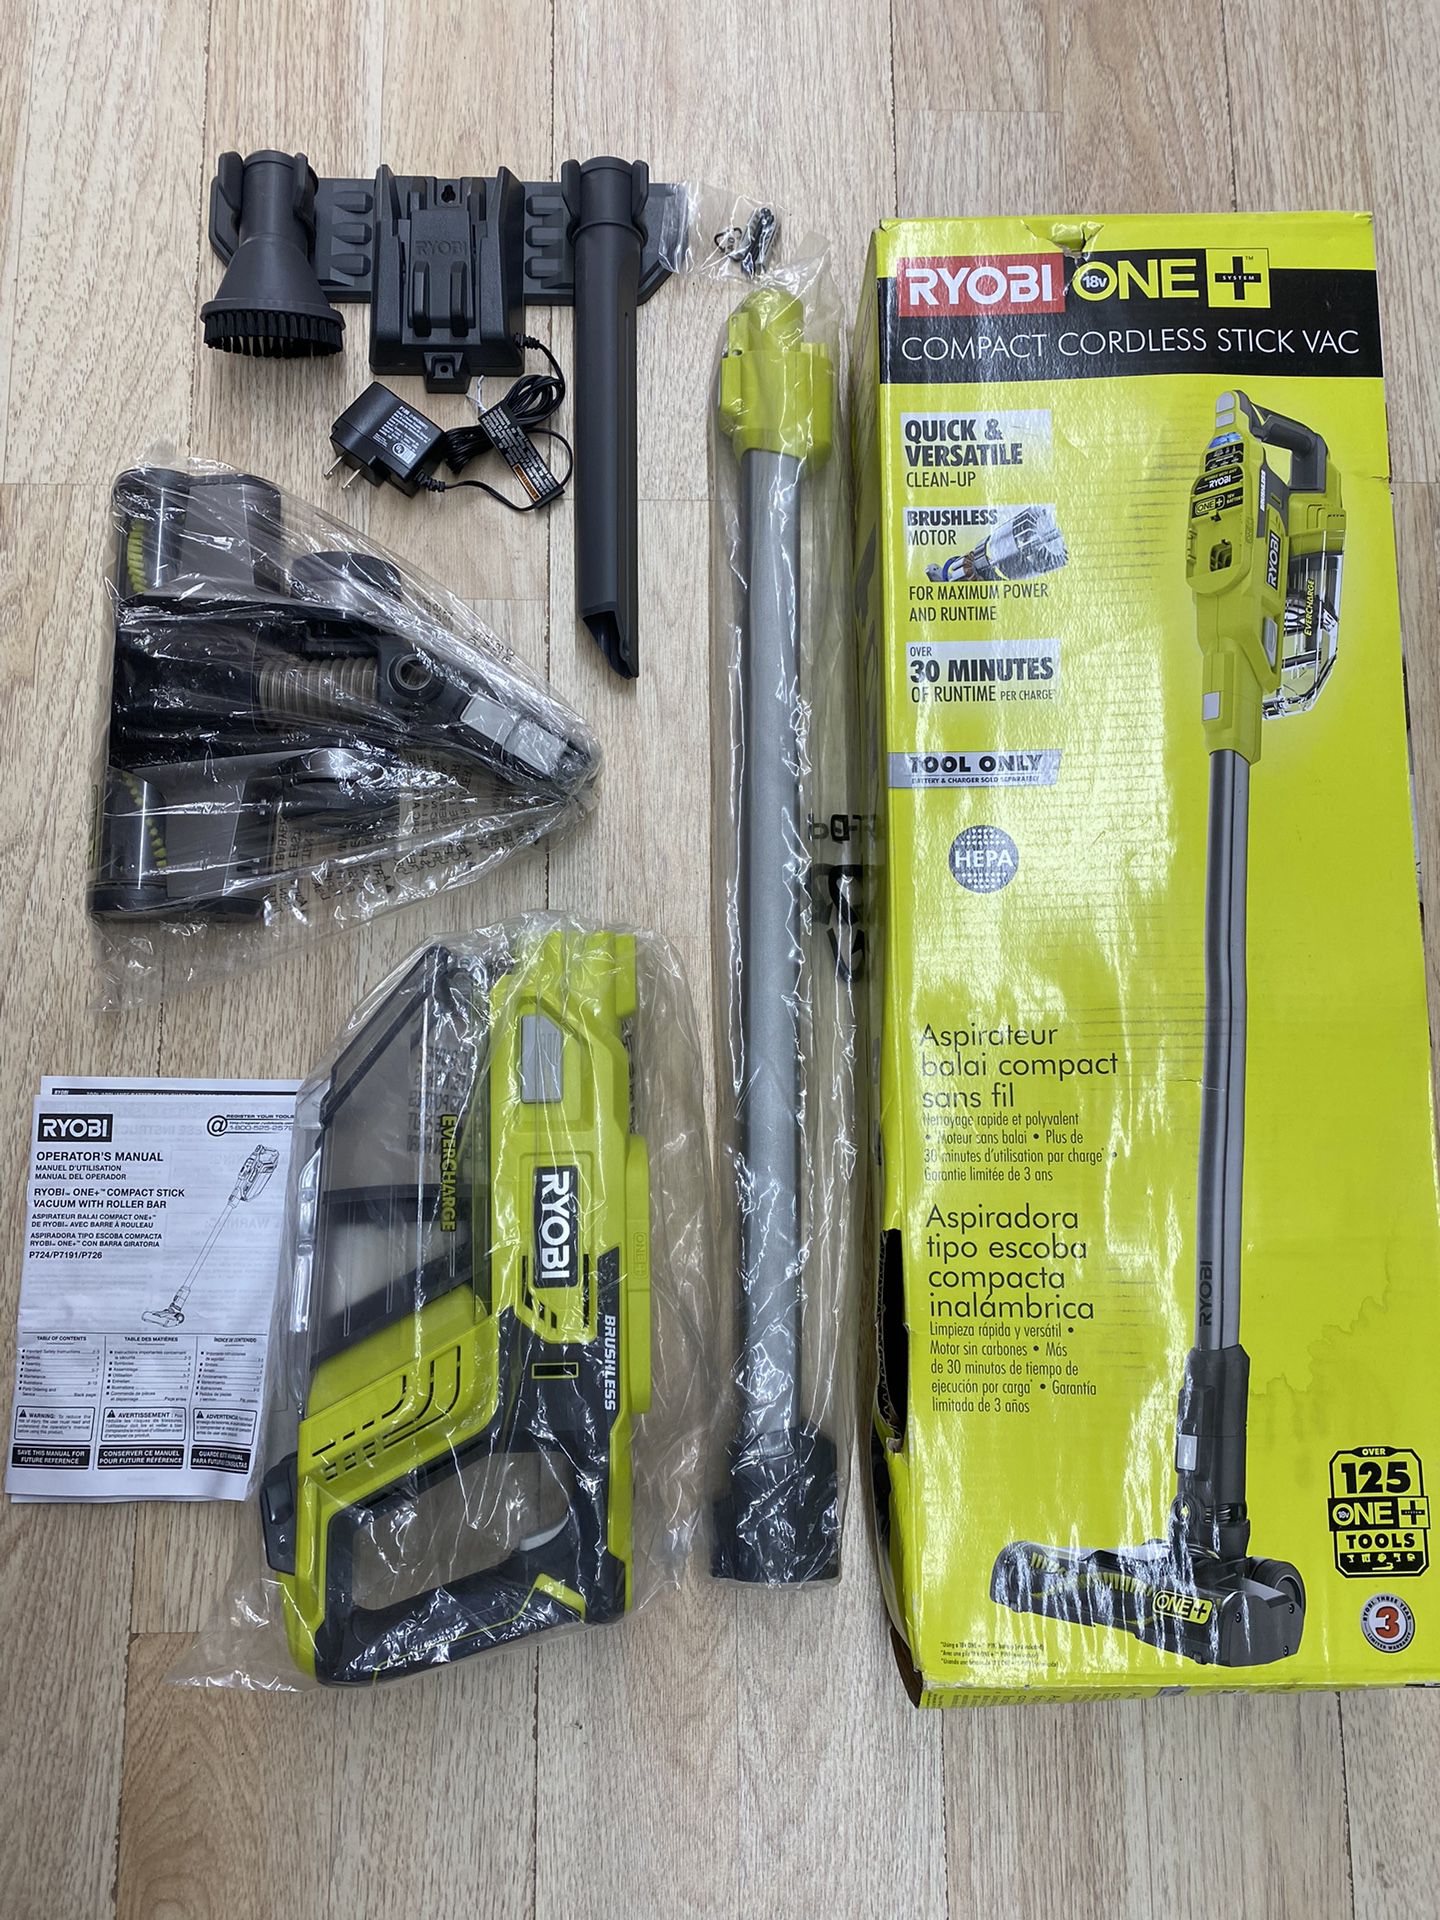 New RYOBI ONE+ 18V Cordless Stick Vacuum Cleaner (Tool Only) for Sale in  Richmond, TX OfferUp